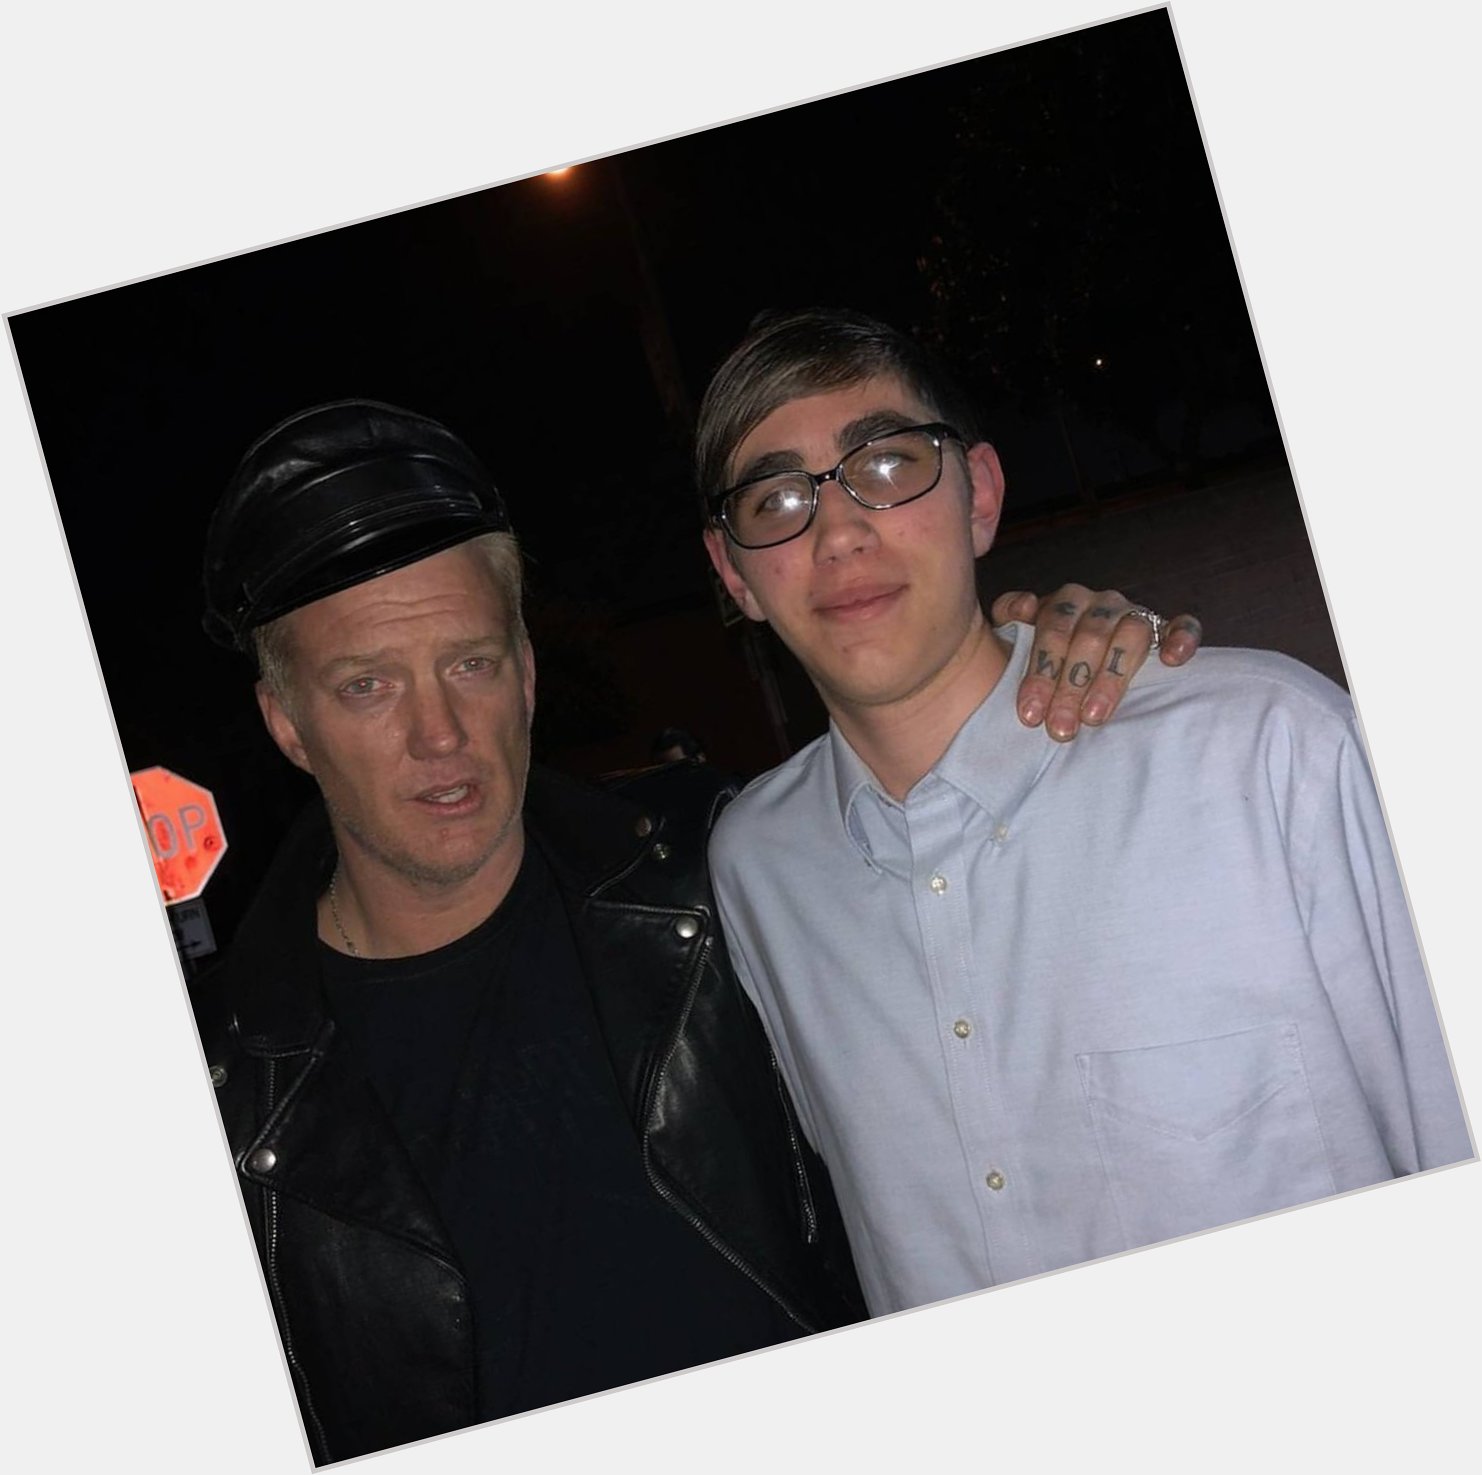  to when I got to meet Josh Homme. Happy birthday to the front man of Queens of the Stone Age 